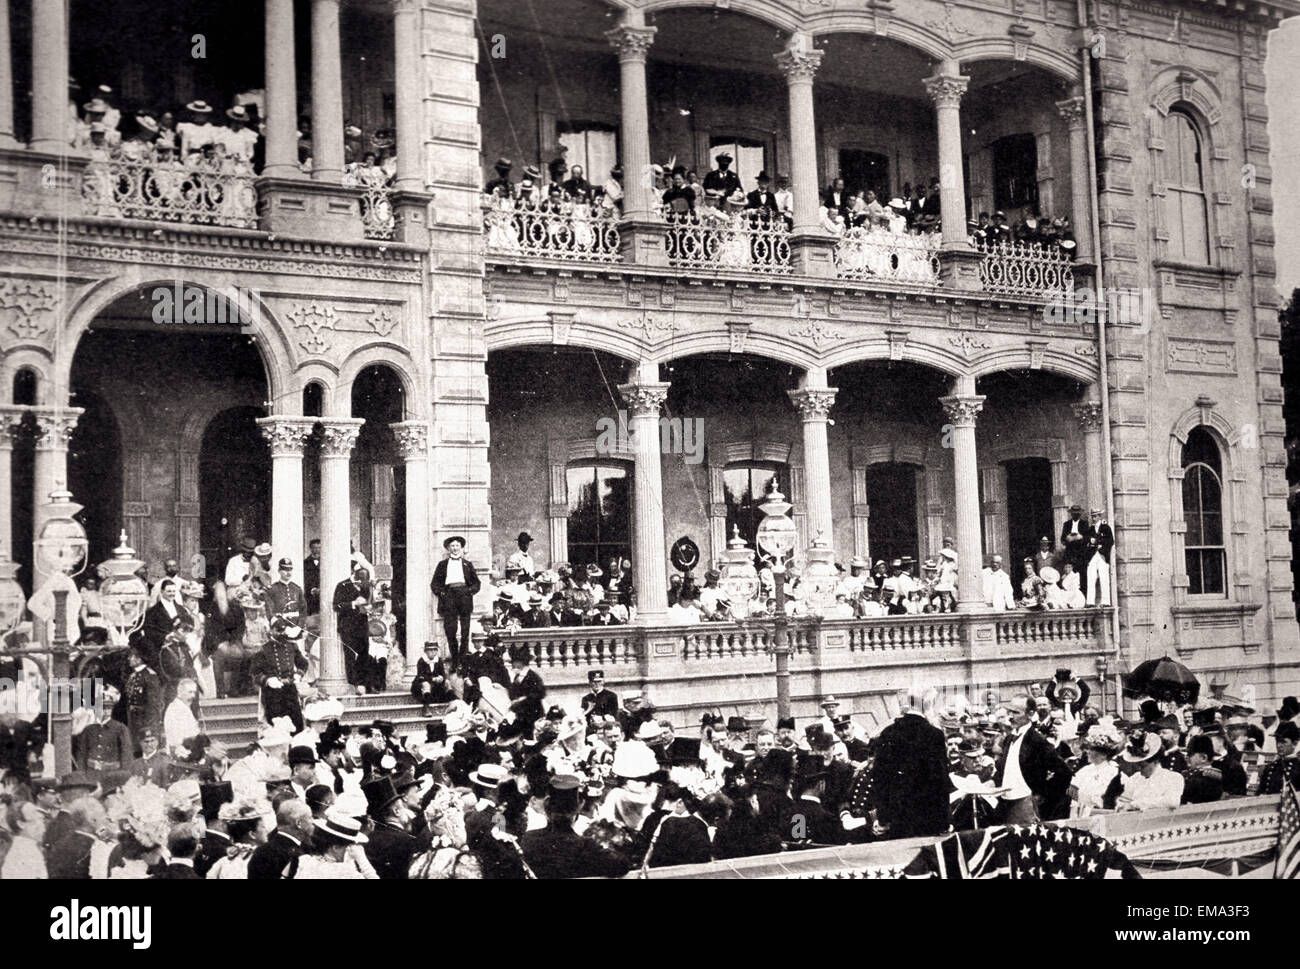 Aug 12, 1898 Photograph Iolani Palace, Territory Of Hawaii Annexation Day Ceremony Crowd Of People Stock Photo